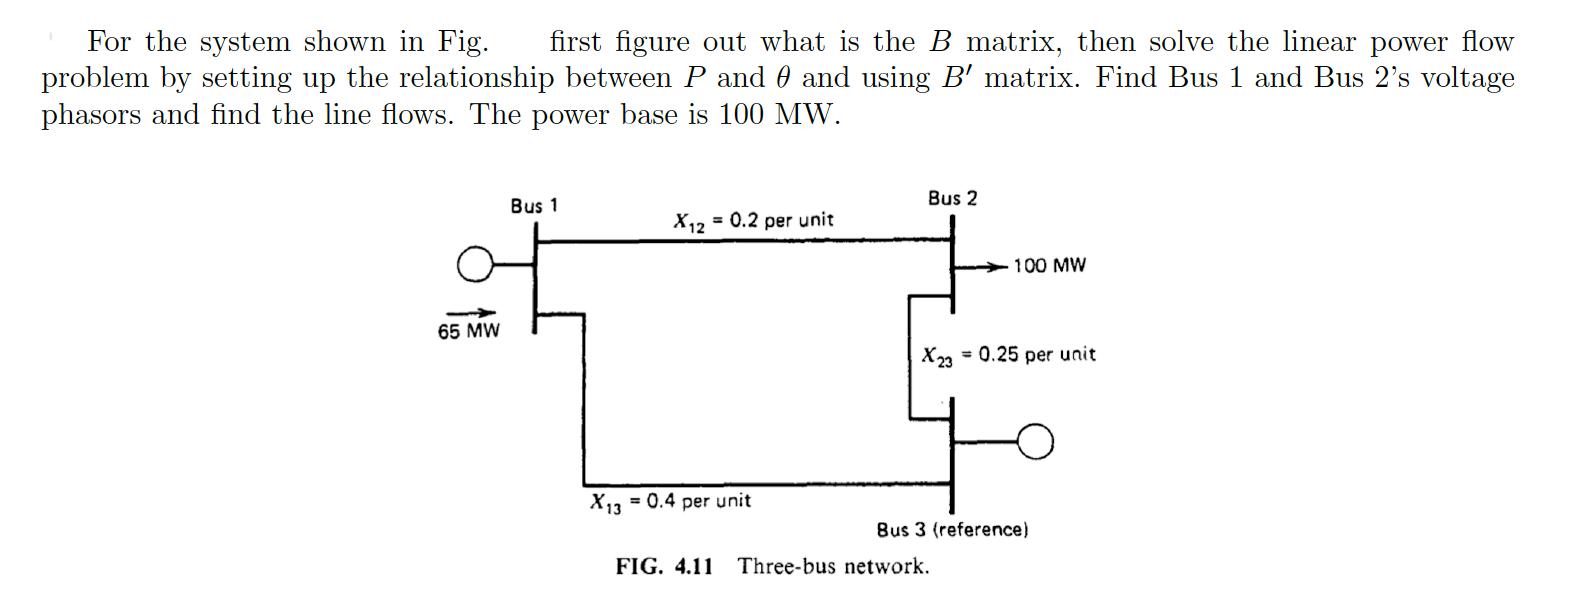 For the system shown in Fig. first figure out what is the B matrix, then solve the linear power flow problem